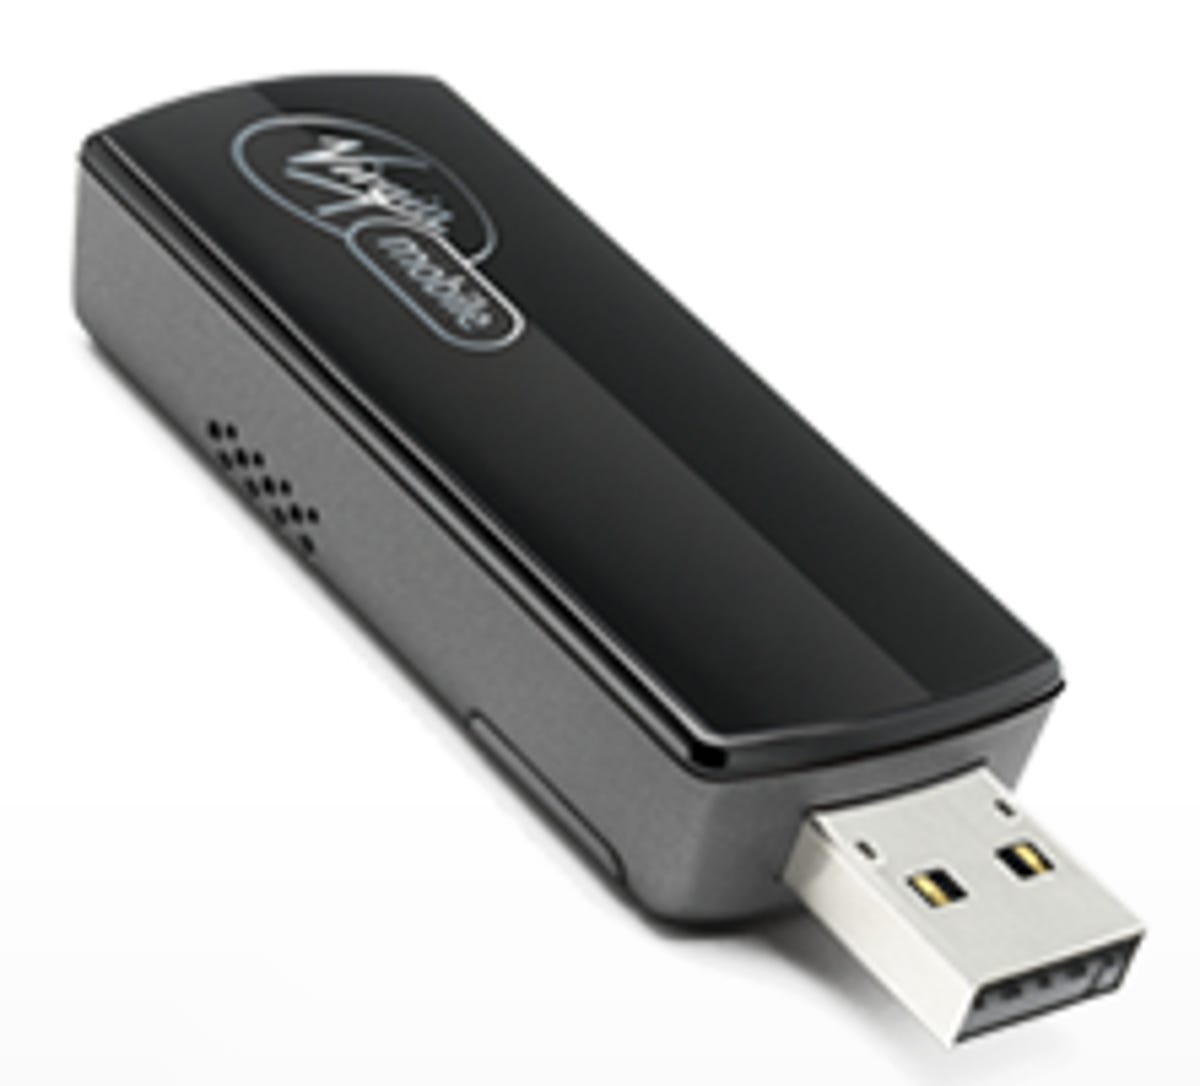 The Ovation MC760 USB device qualifies for the BroadBand2Go plan.